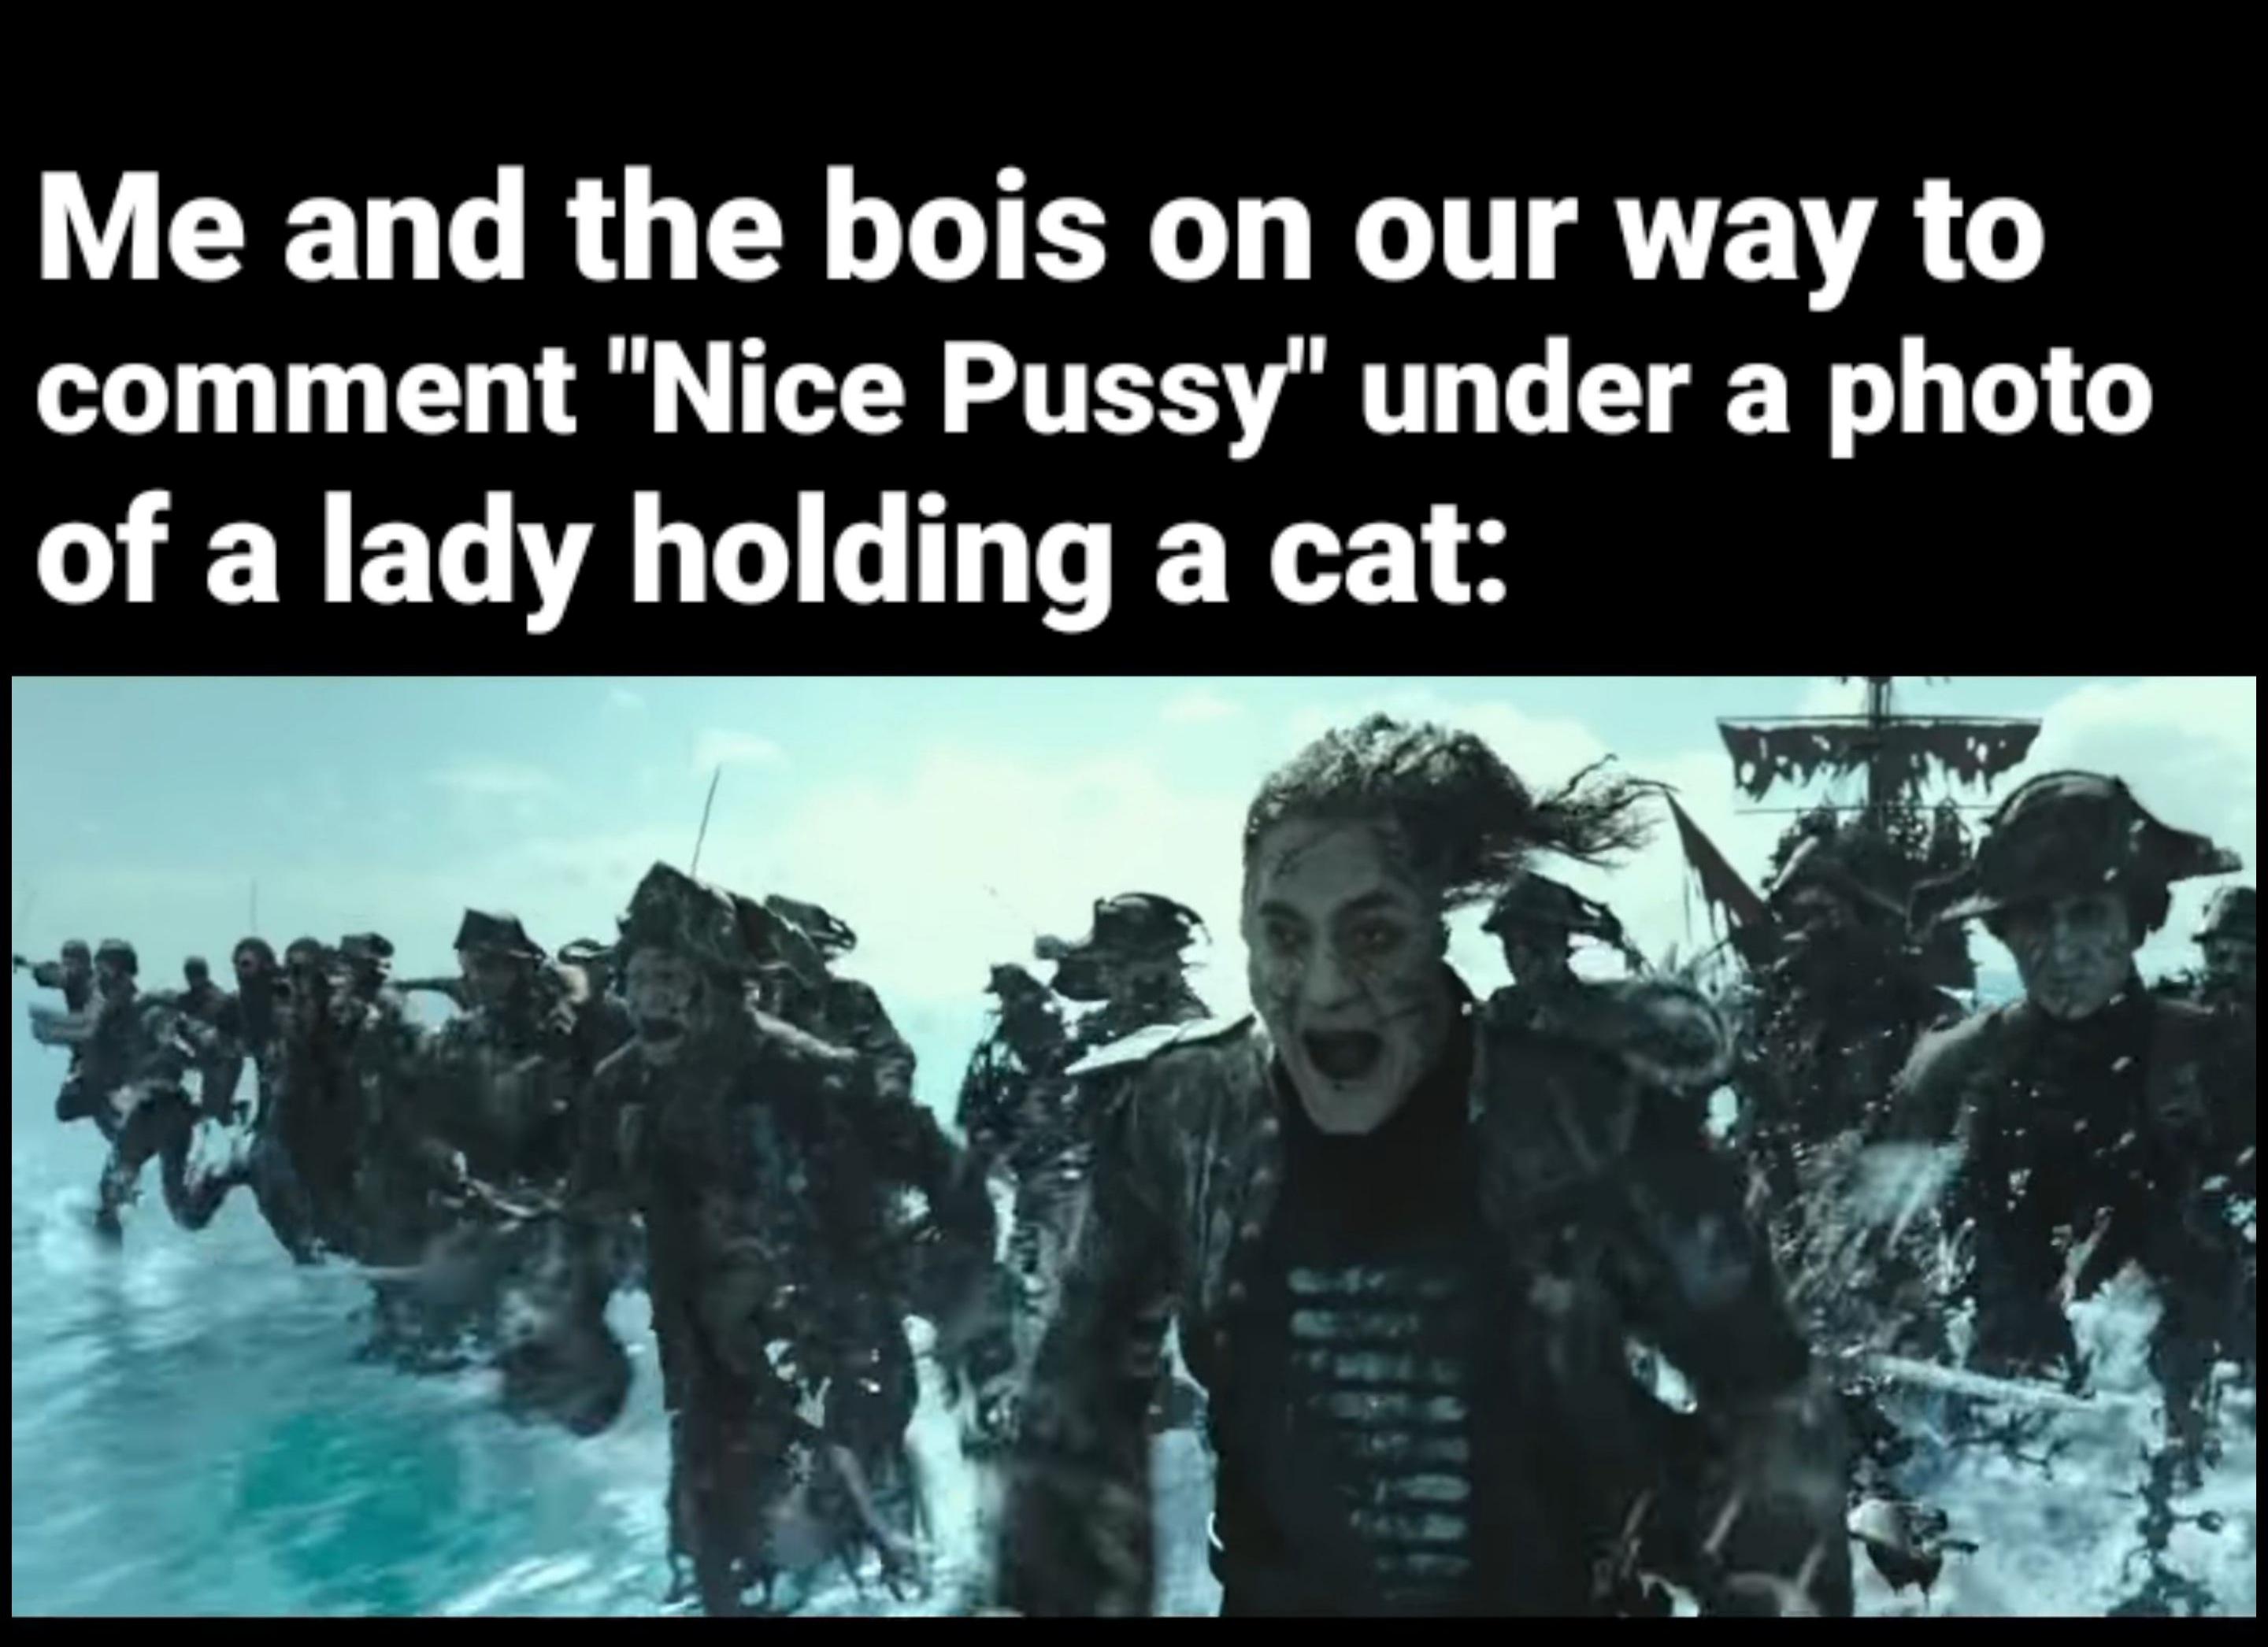 military - Me and the bois on our way to comment "Nice Pussy' under a photo of a lady holding a cat